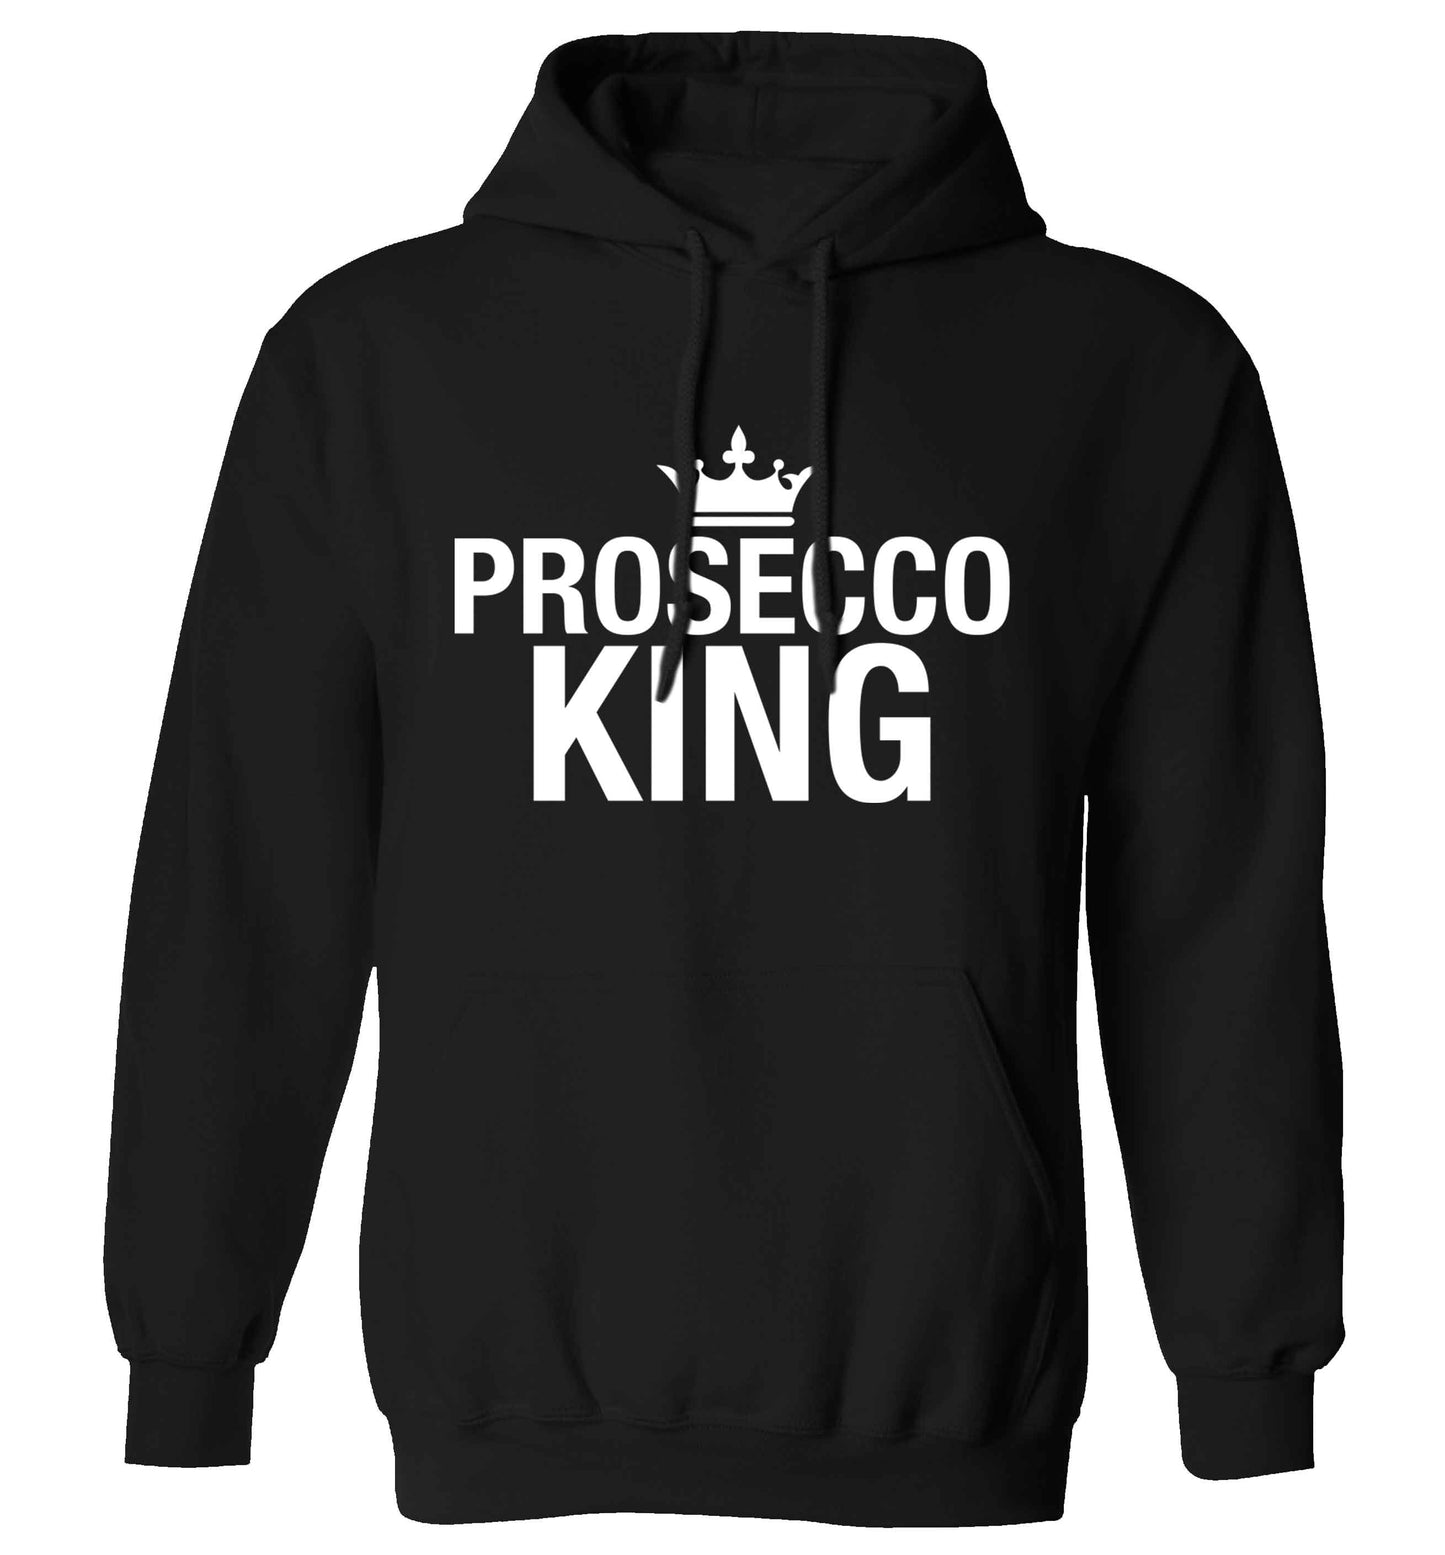 Prosecco king adults unisex black hoodie 2XL